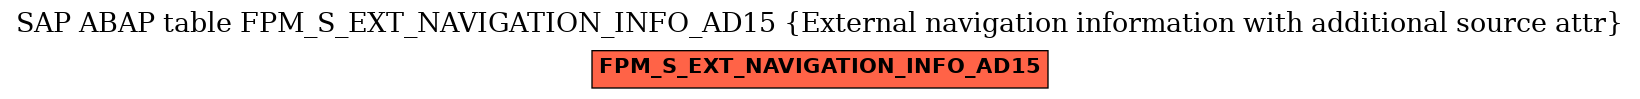 E-R Diagram for table FPM_S_EXT_NAVIGATION_INFO_AD15 (External navigation information with additional source attr)